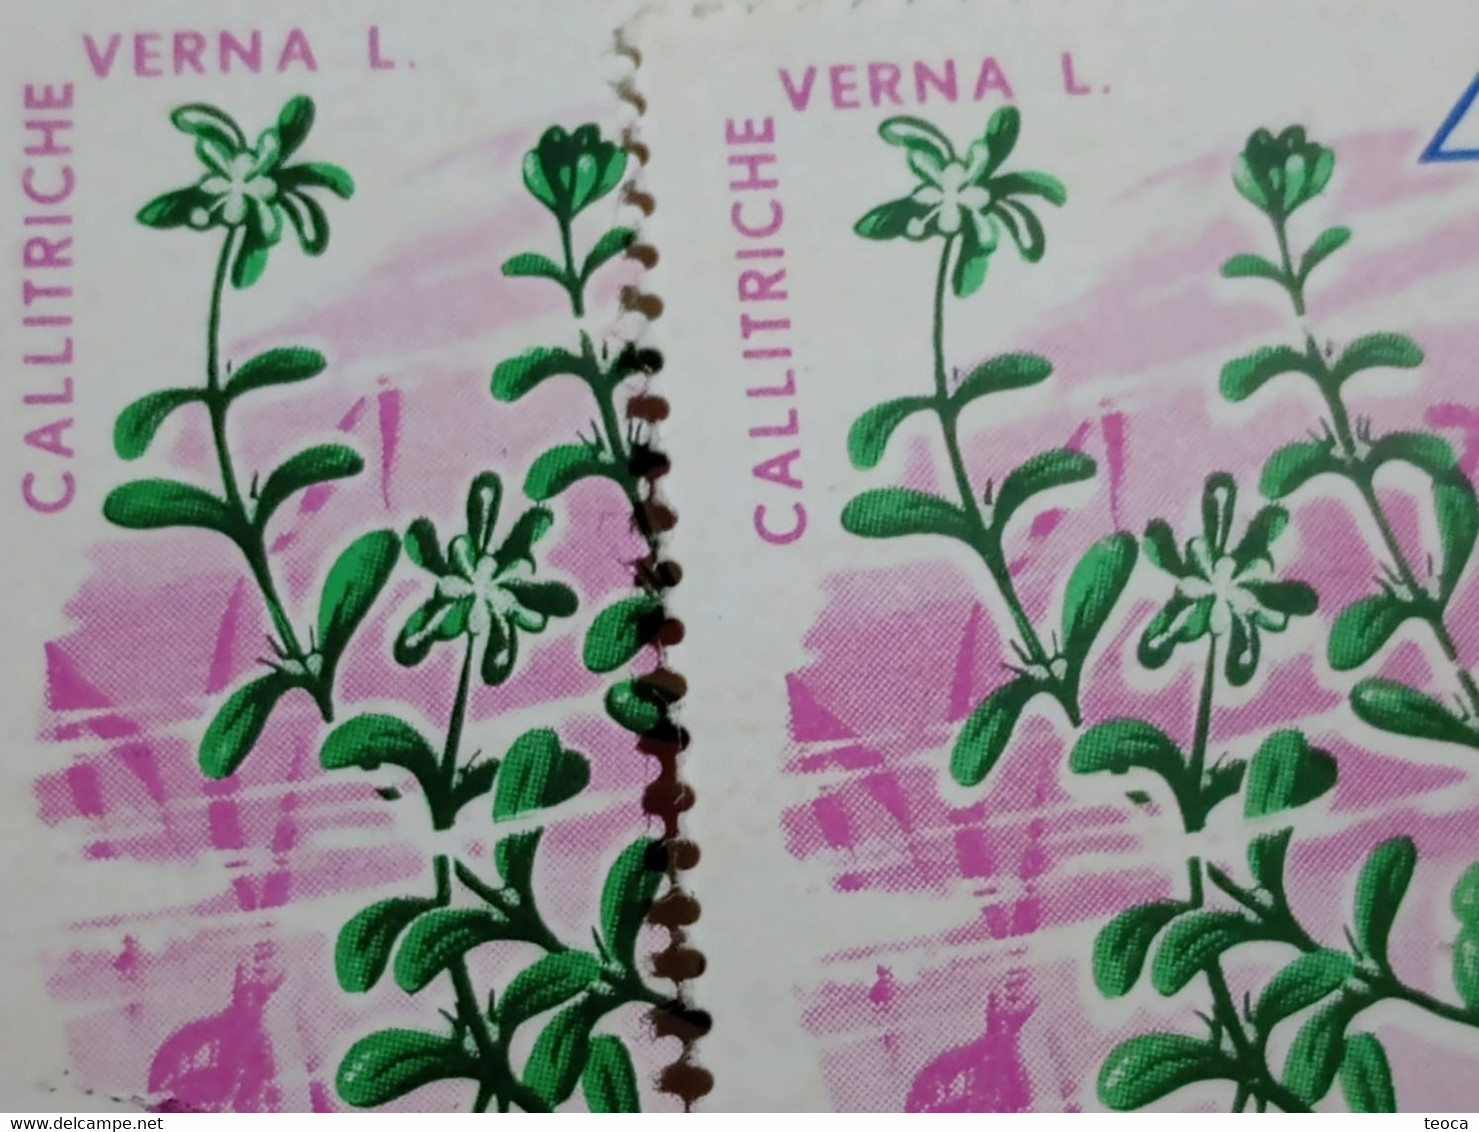 Stamps Errors Romania 1966 # Mi 2528 Printed With Misplaced Plants Flower Image Used - Plaatfouten En Curiosa